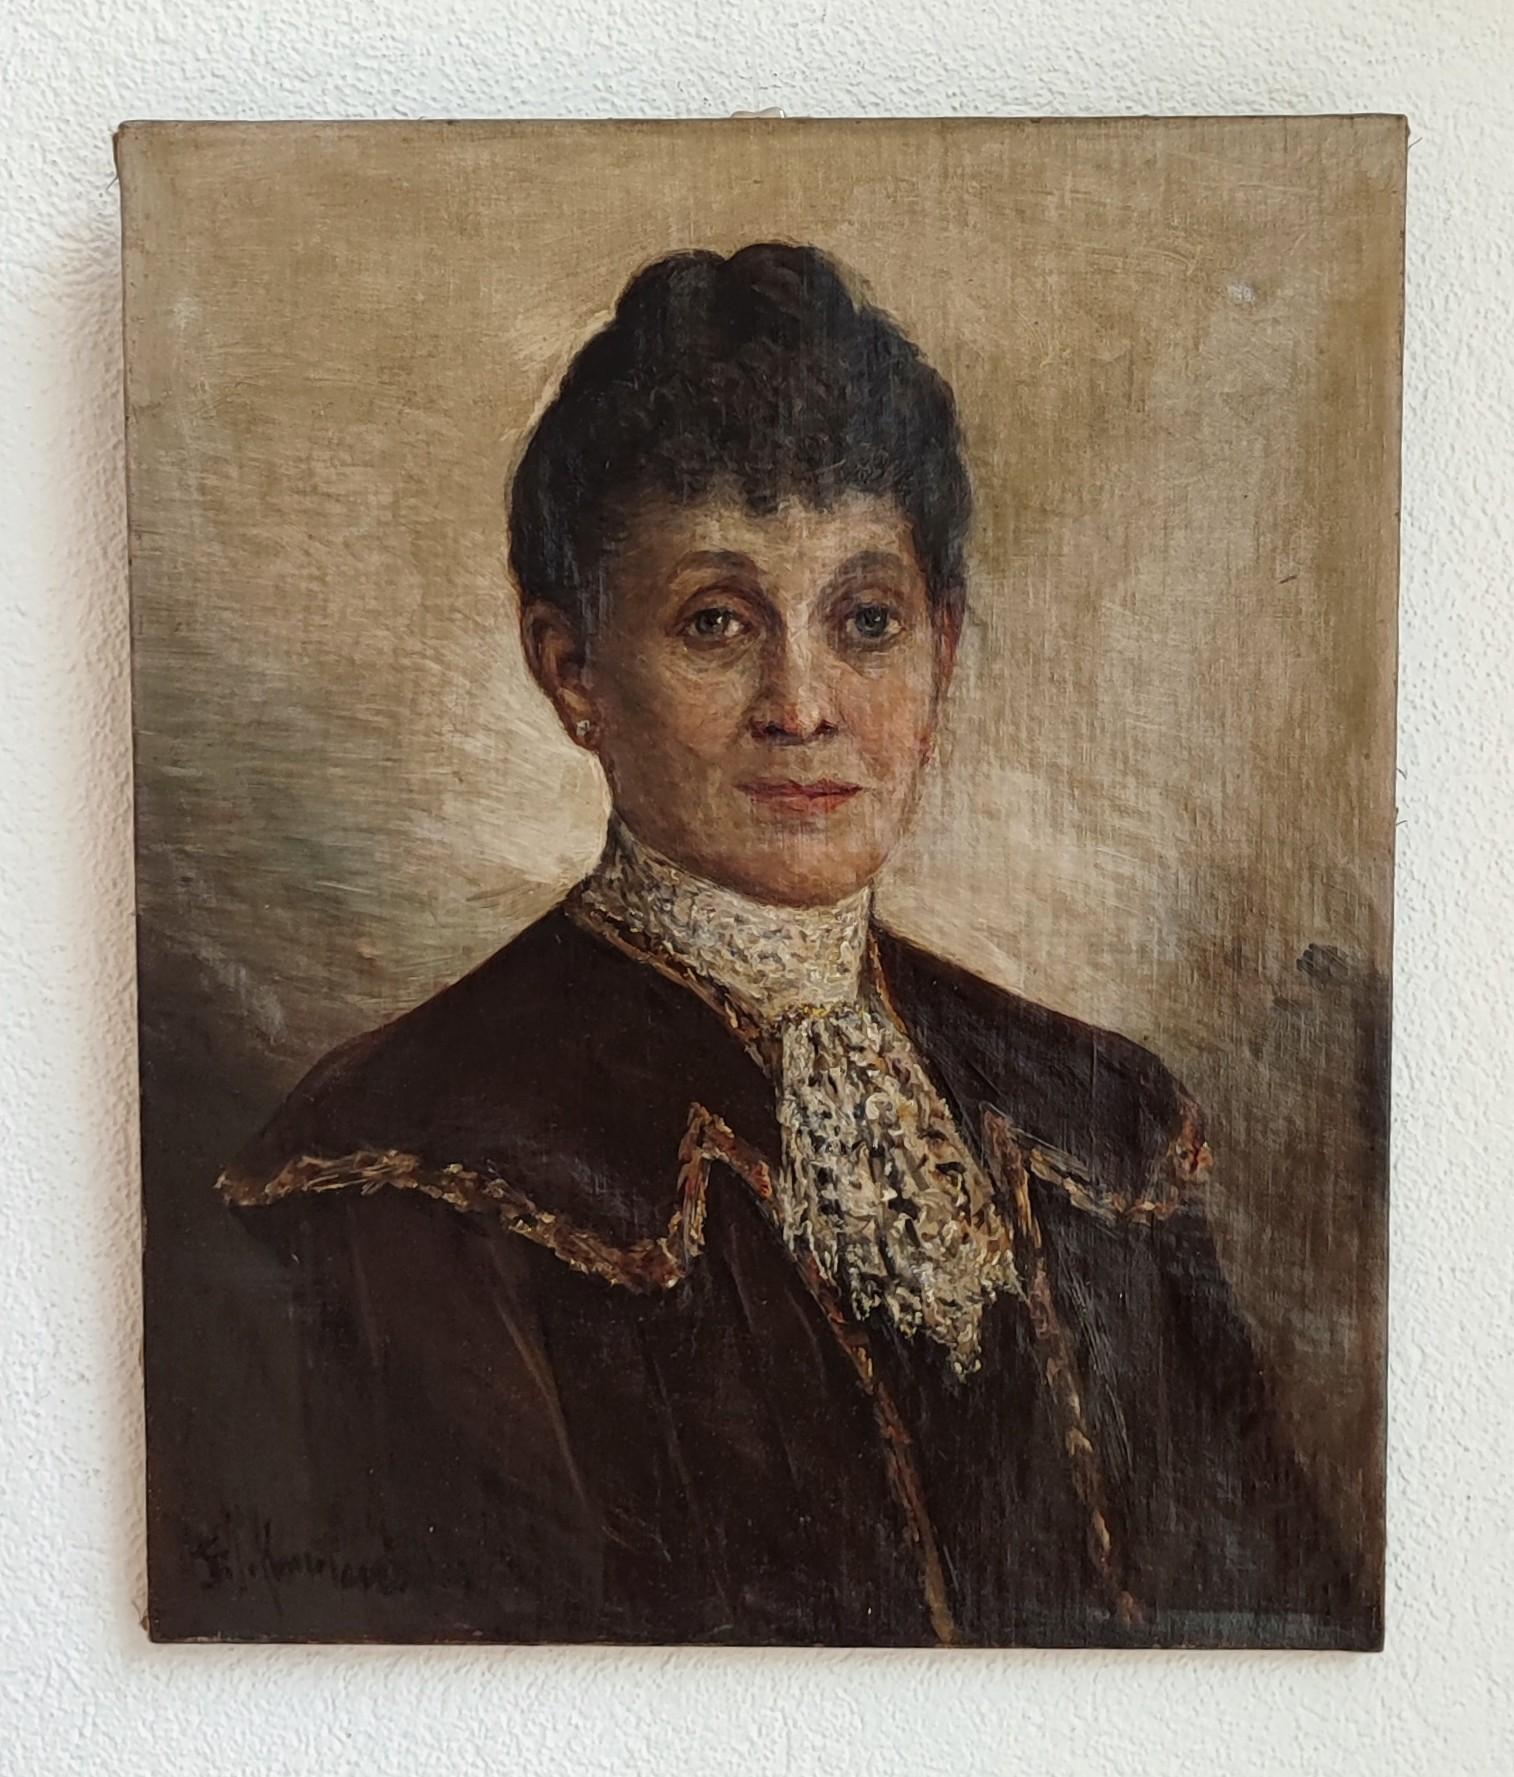 Lady with bun and lace scarf - Painting by Unknown